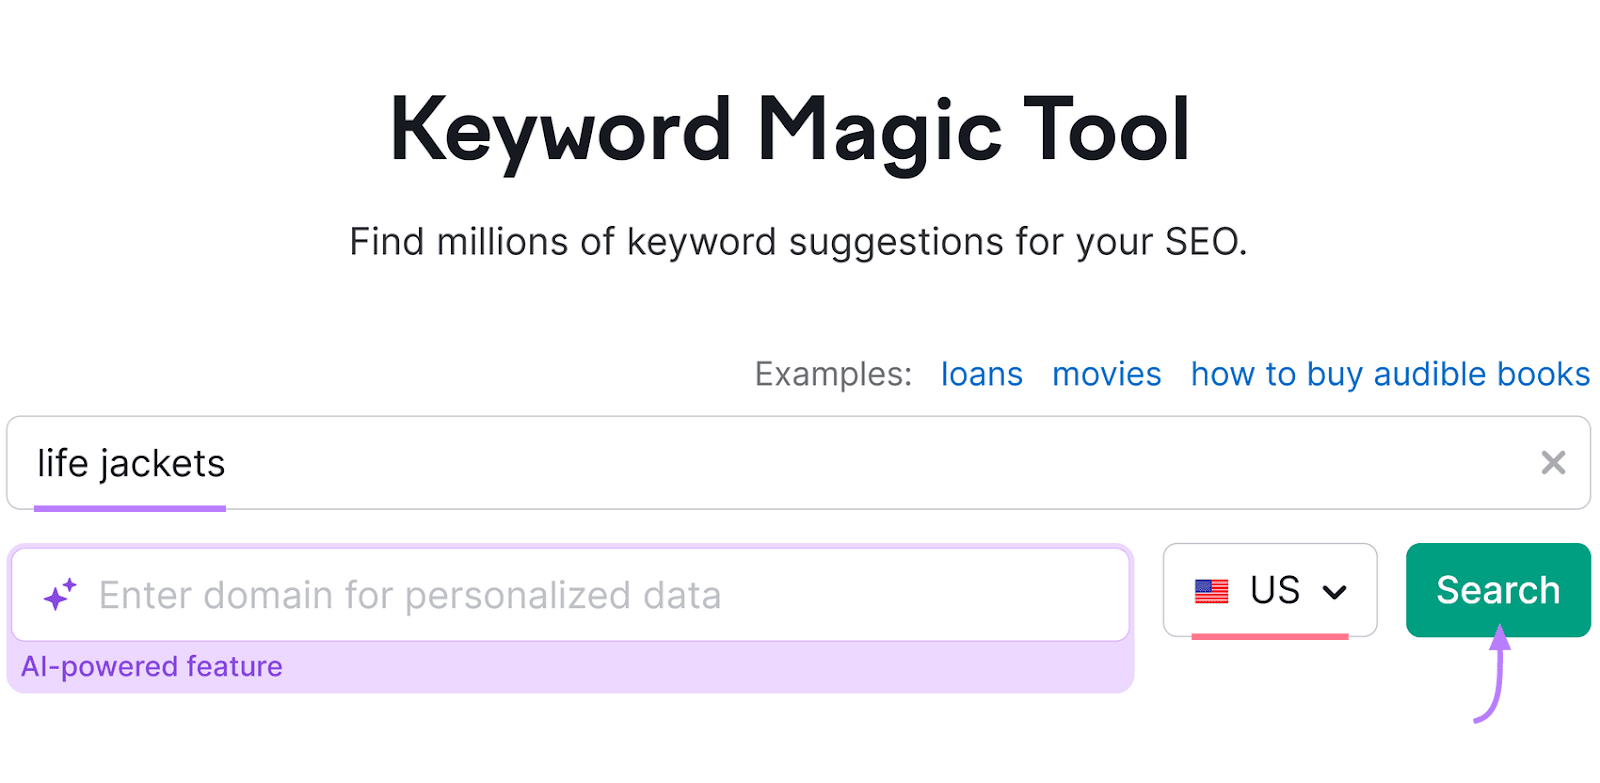 Keyword Magic Tool interface with the keyword "life jackets" entered and a search button with a curved arrow pointing to it.